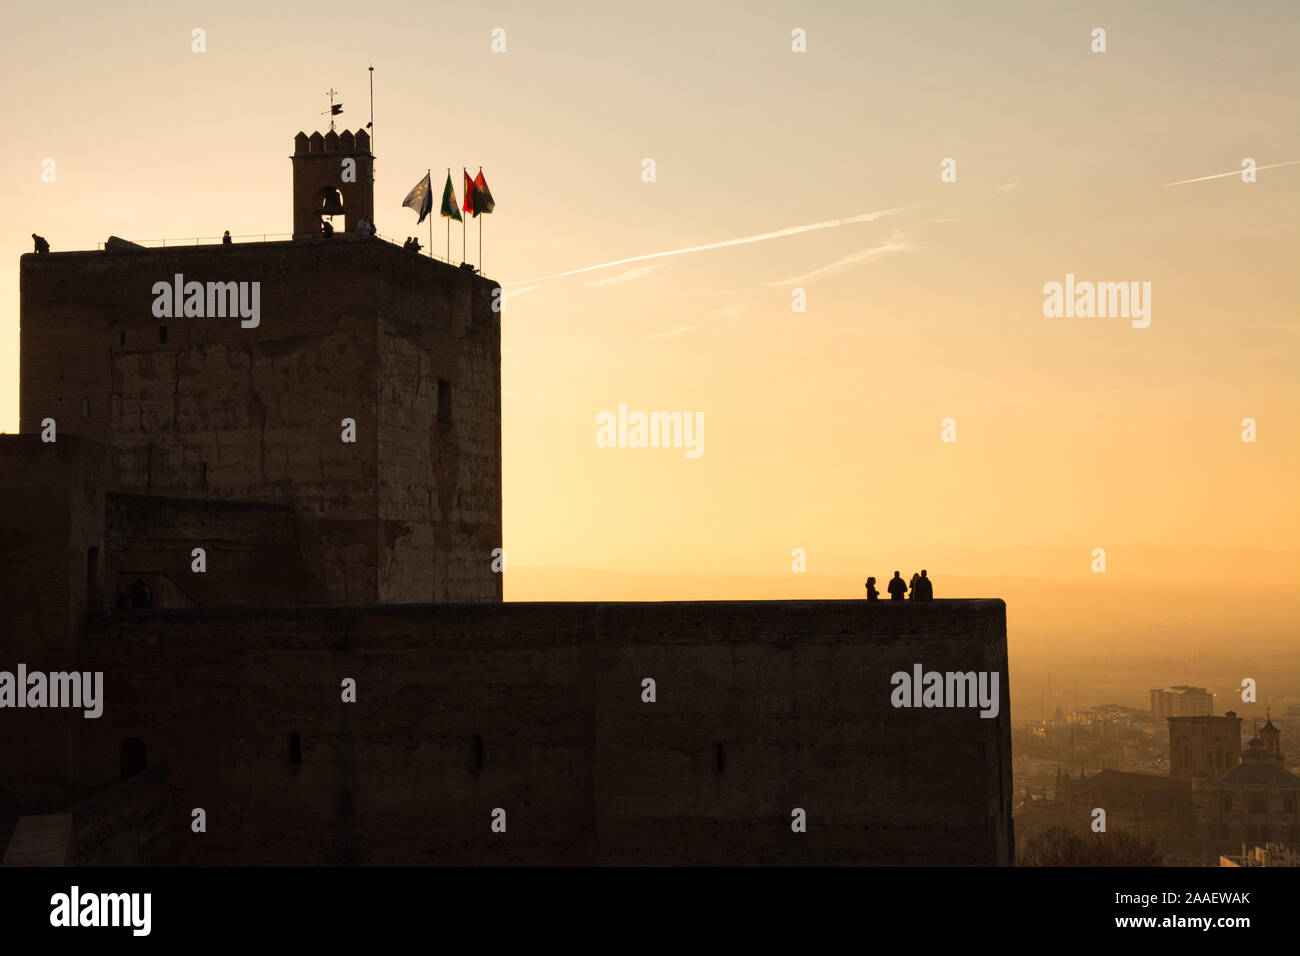 People silhouetted on the Torre De La Vela and Torre de las Armas at sunset, at the Alcazaba fortress of the Alhambra palace complex, Granada, Spain. Stock Photo